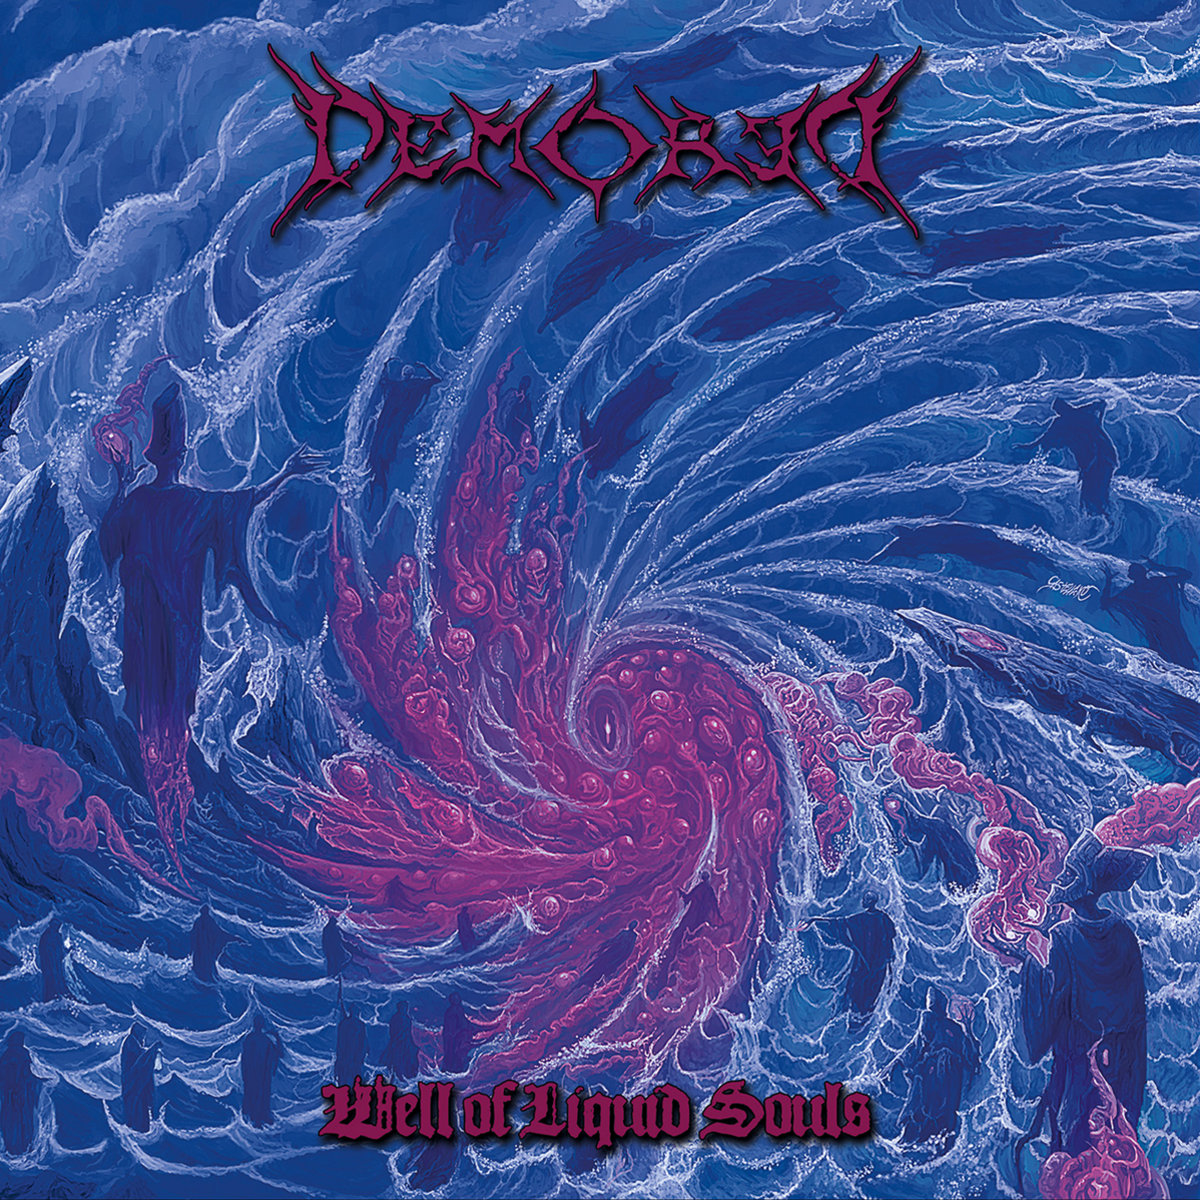 Old-school, dark and cold death metal that will blow your veins! Fall into the depths of eternity! Recenze/review - DEMORED - Well of Liquid Souls (2024): deadlystormzine.com/2024/05/recenz… #deathmetal #demored #review .@newmetalalbums1 .@slawawasil2 .@metal_incognito .@DiscosDeath